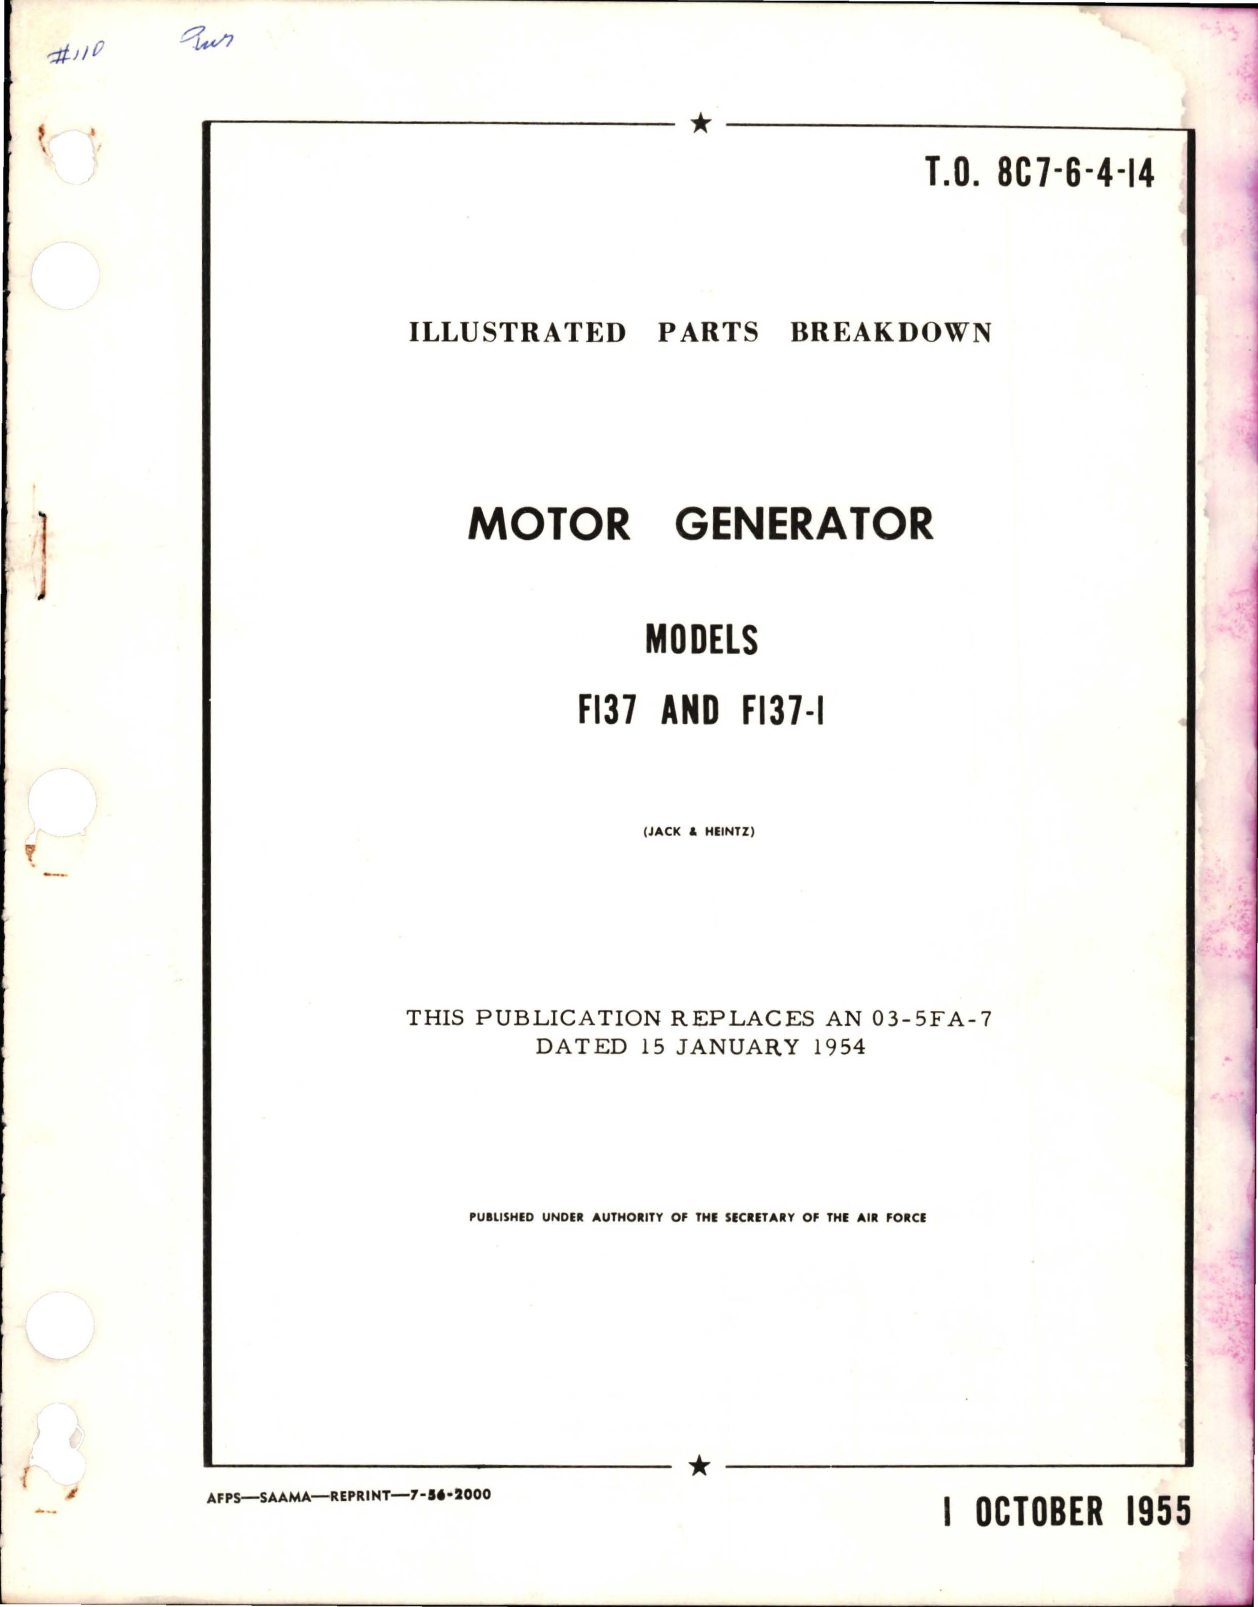 Sample page 1 from AirCorps Library document: Illustrated Parts Breakdown for Motor Generator - Models F137 and F137-1